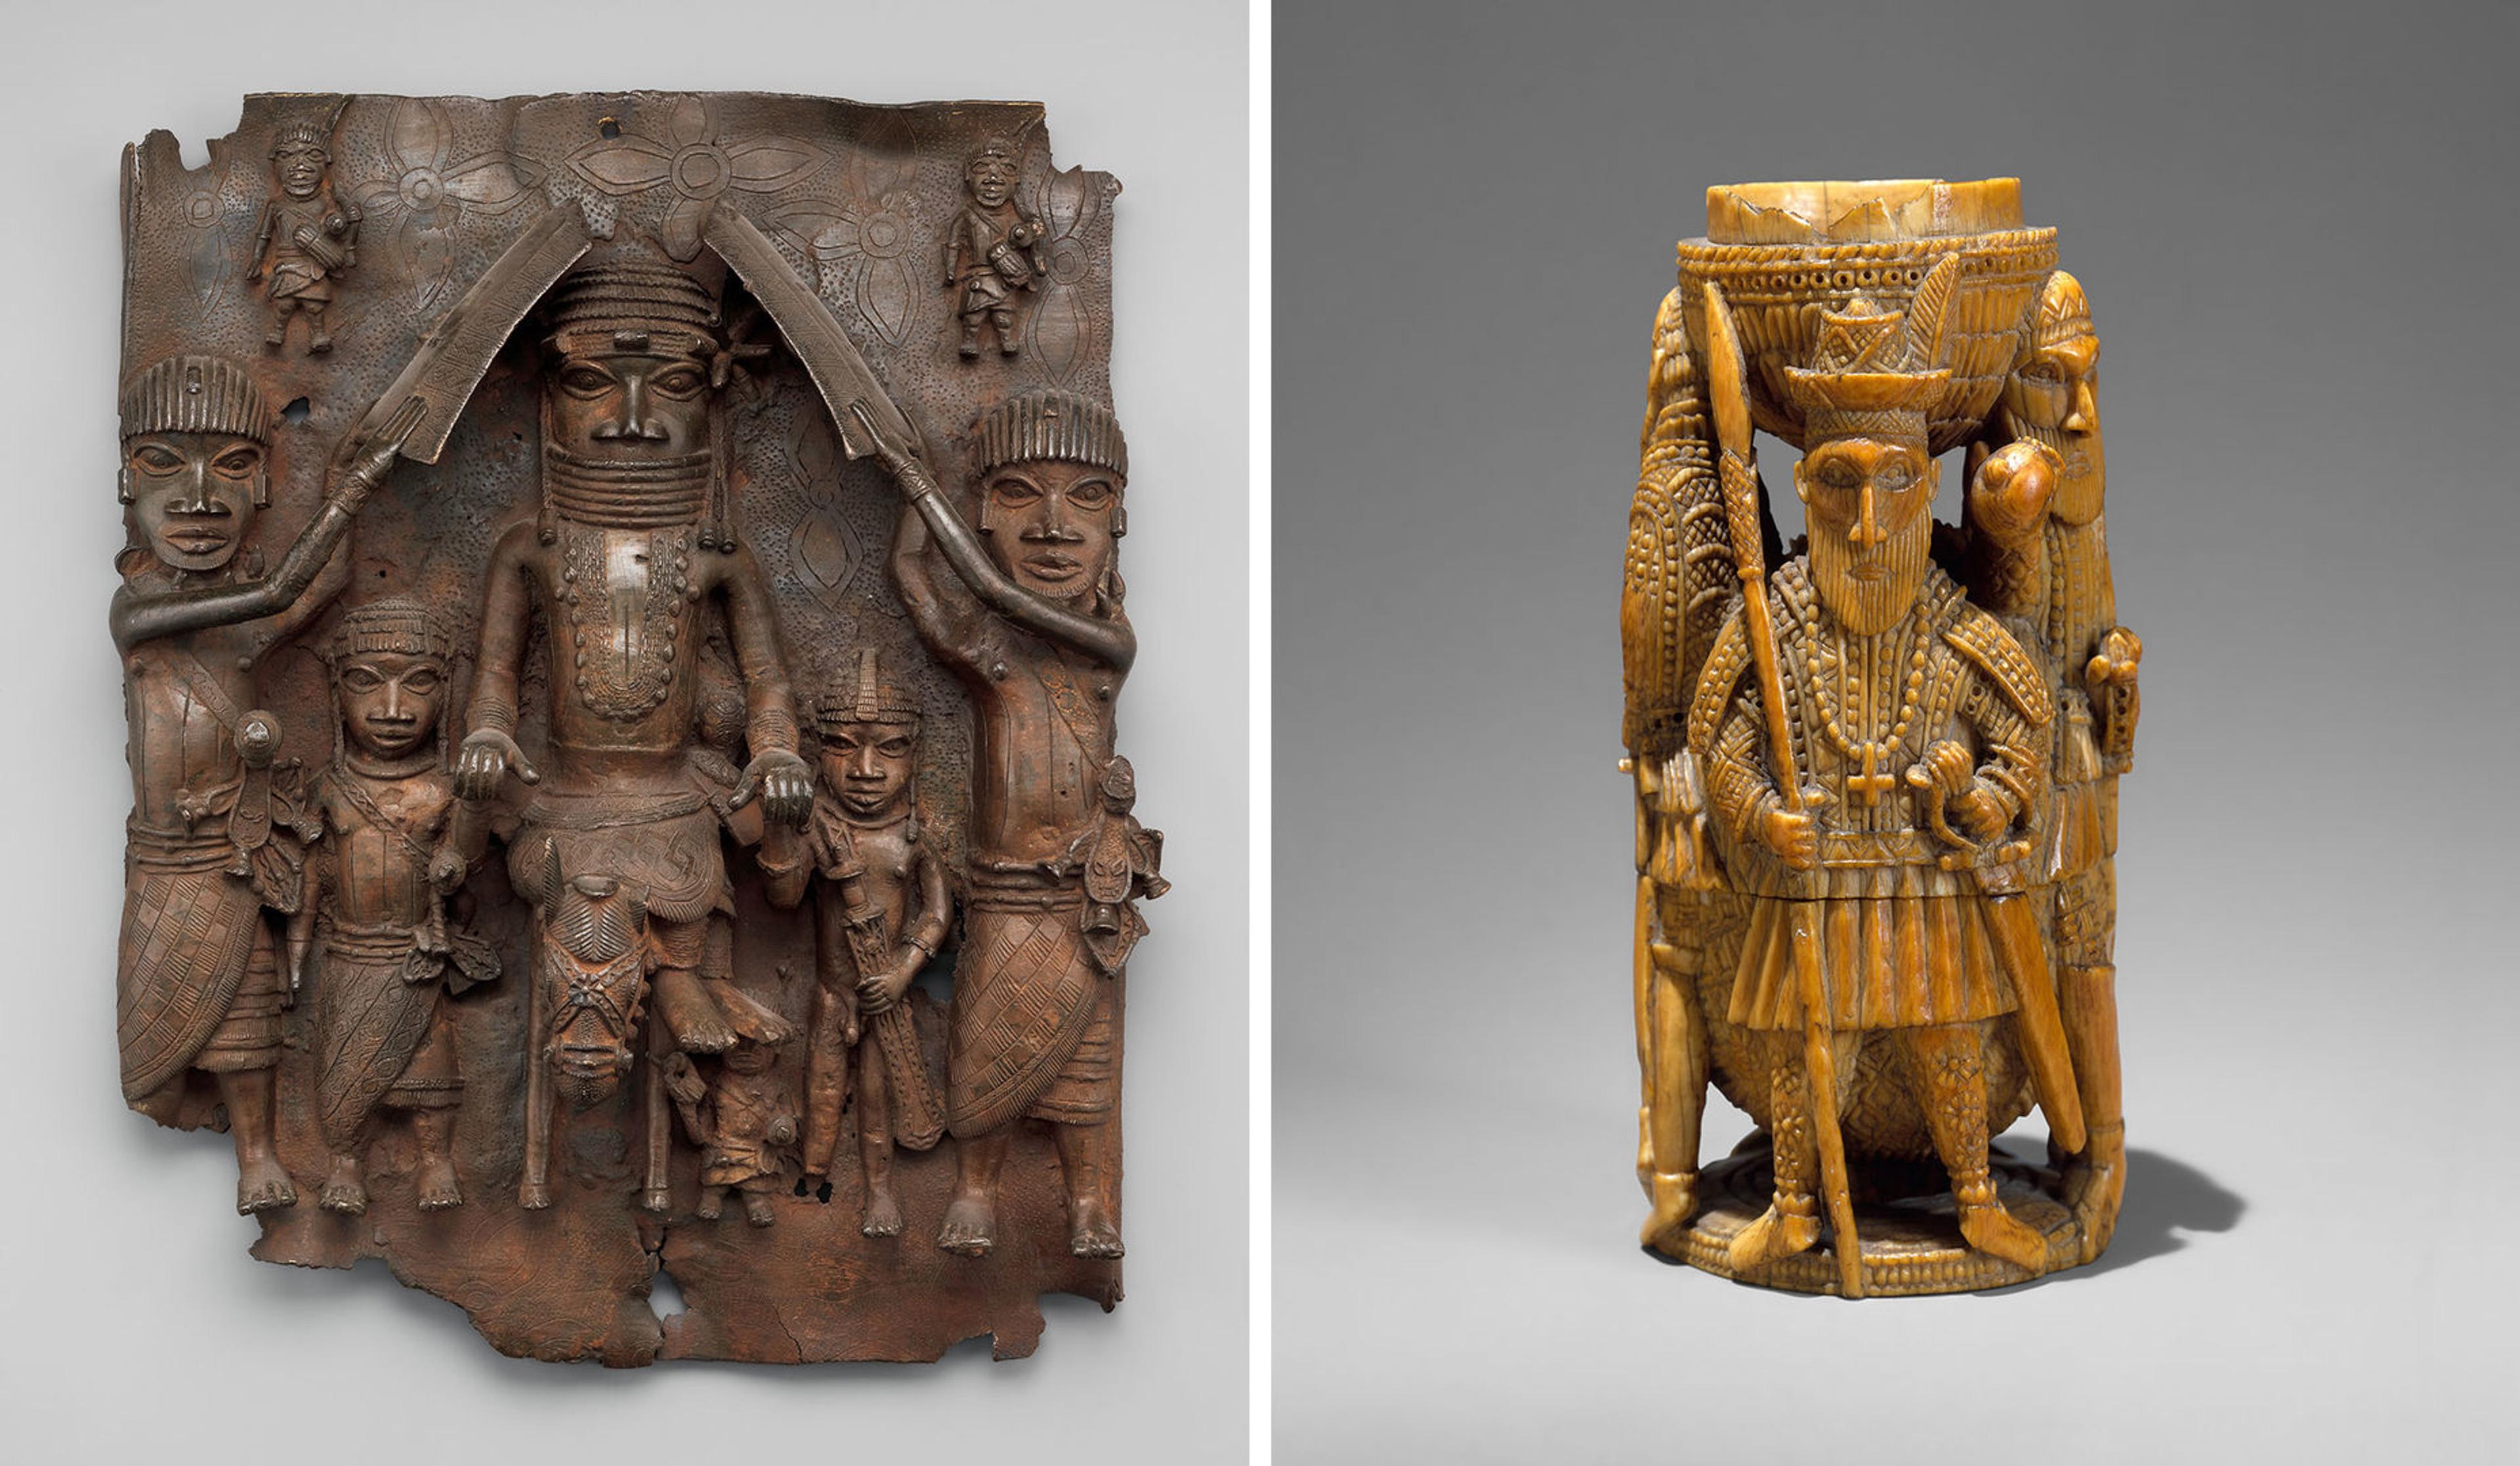 A composite image of two artworks. At left, a sculptural relief plaque made of brass depicting a central figure on horseback flanked by smaller attending figures to either side. At right, a sculptural saltcellar made of ivory composed of four male figures, two richly adorned men and their attendants, depicted around the perimeter of the receptacle.